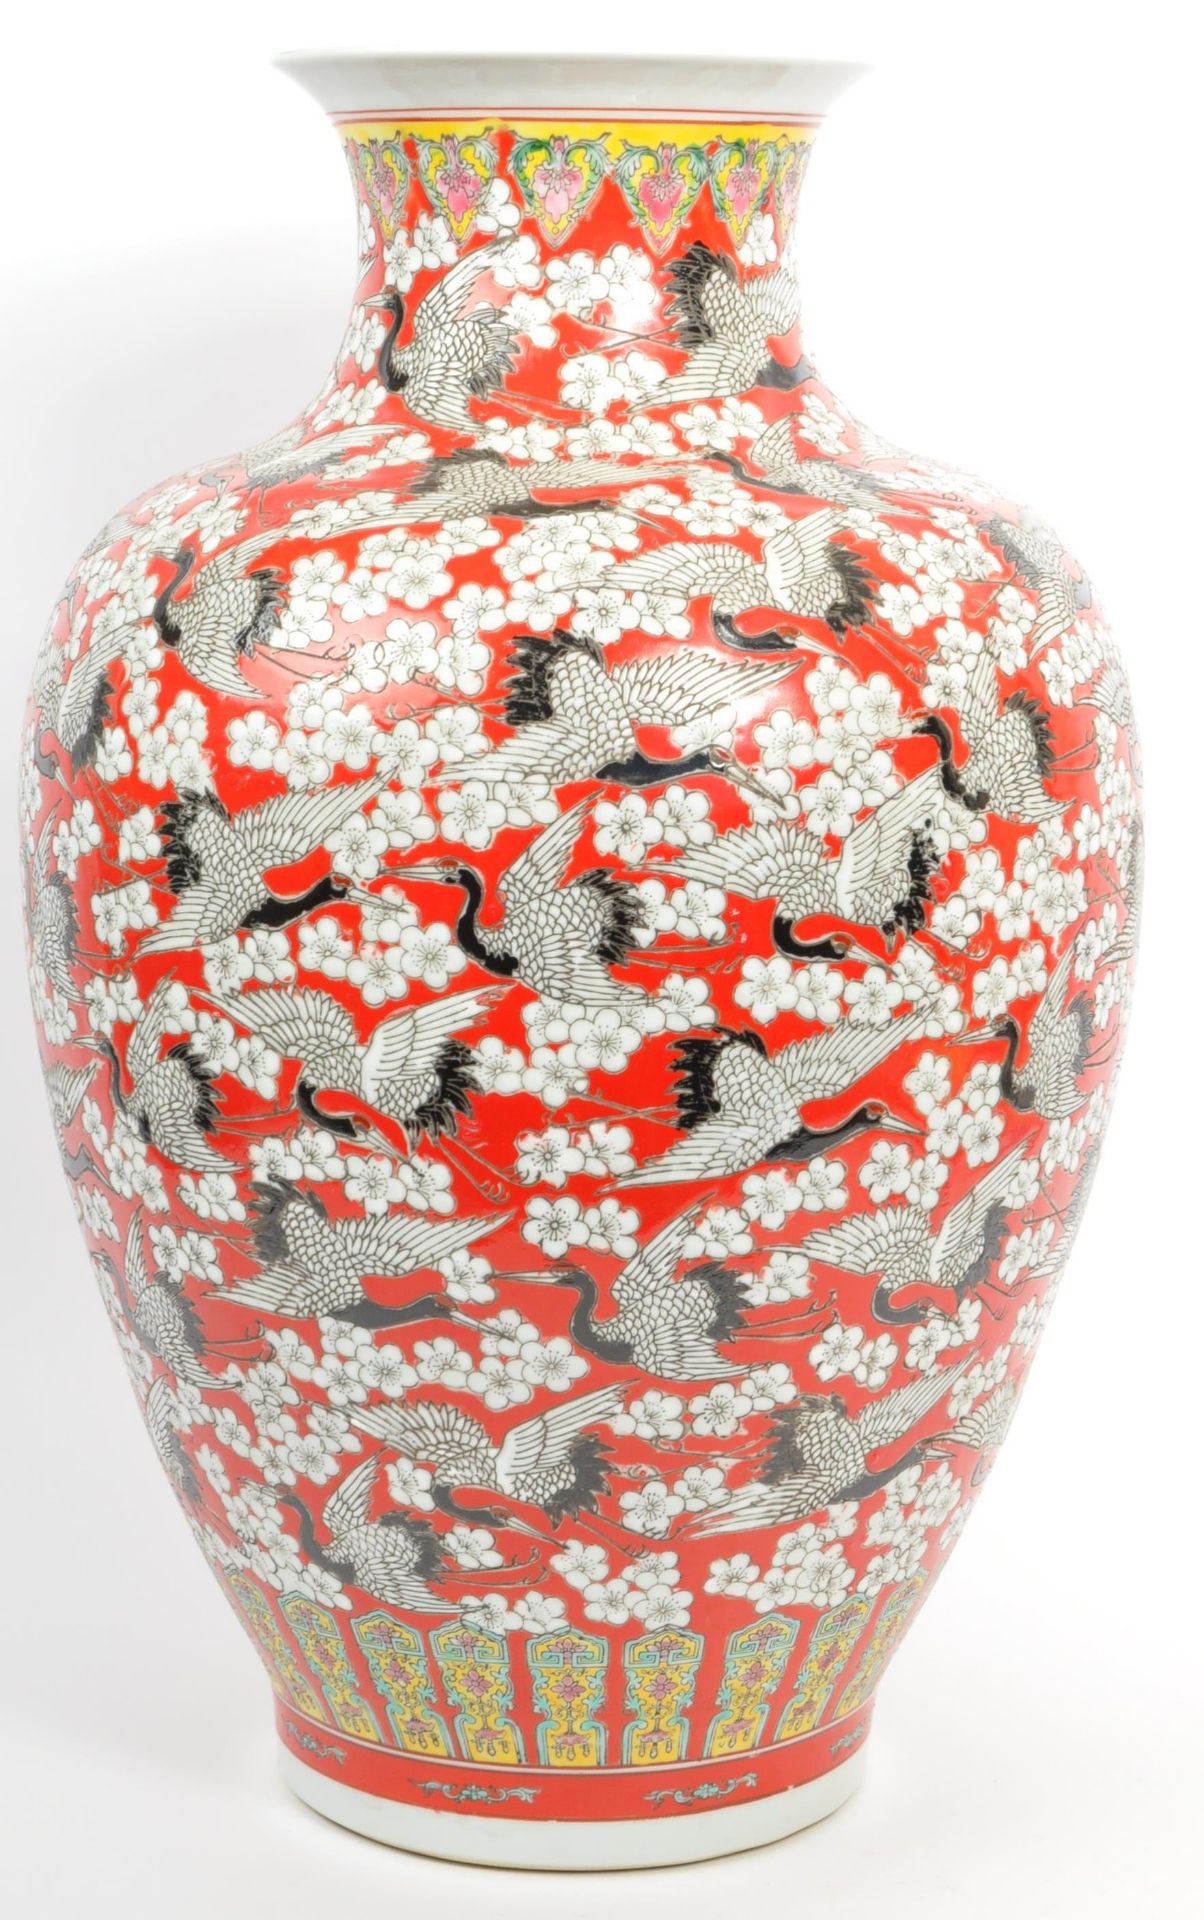 LARGE CHINESE VASE IN RED EMBELLISHED WITH CRANES & BLOSSOM - Image 2 of 6